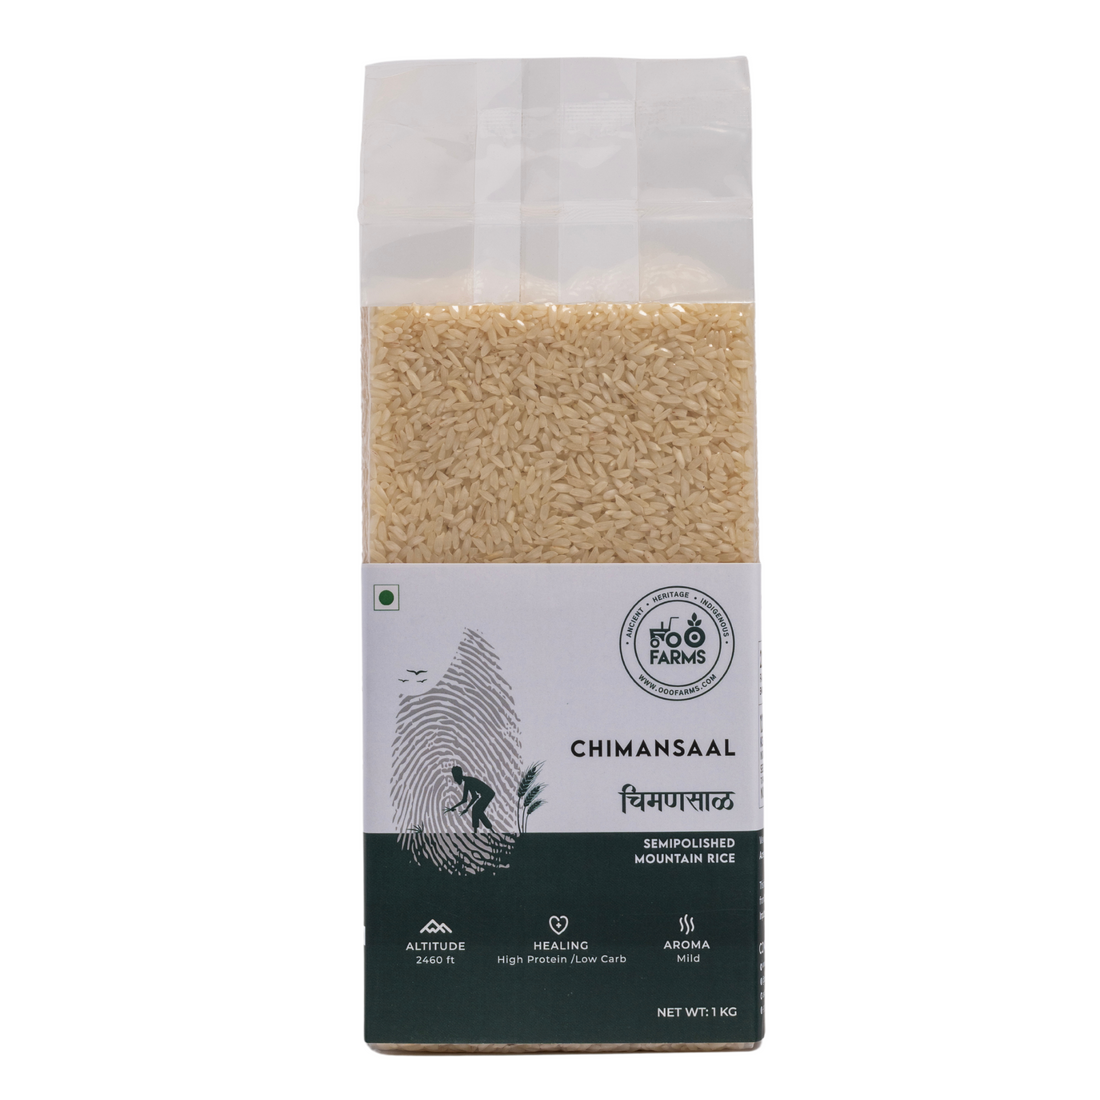 OOO Farms Chimansaal Rice (Semipolished) Package Frontside